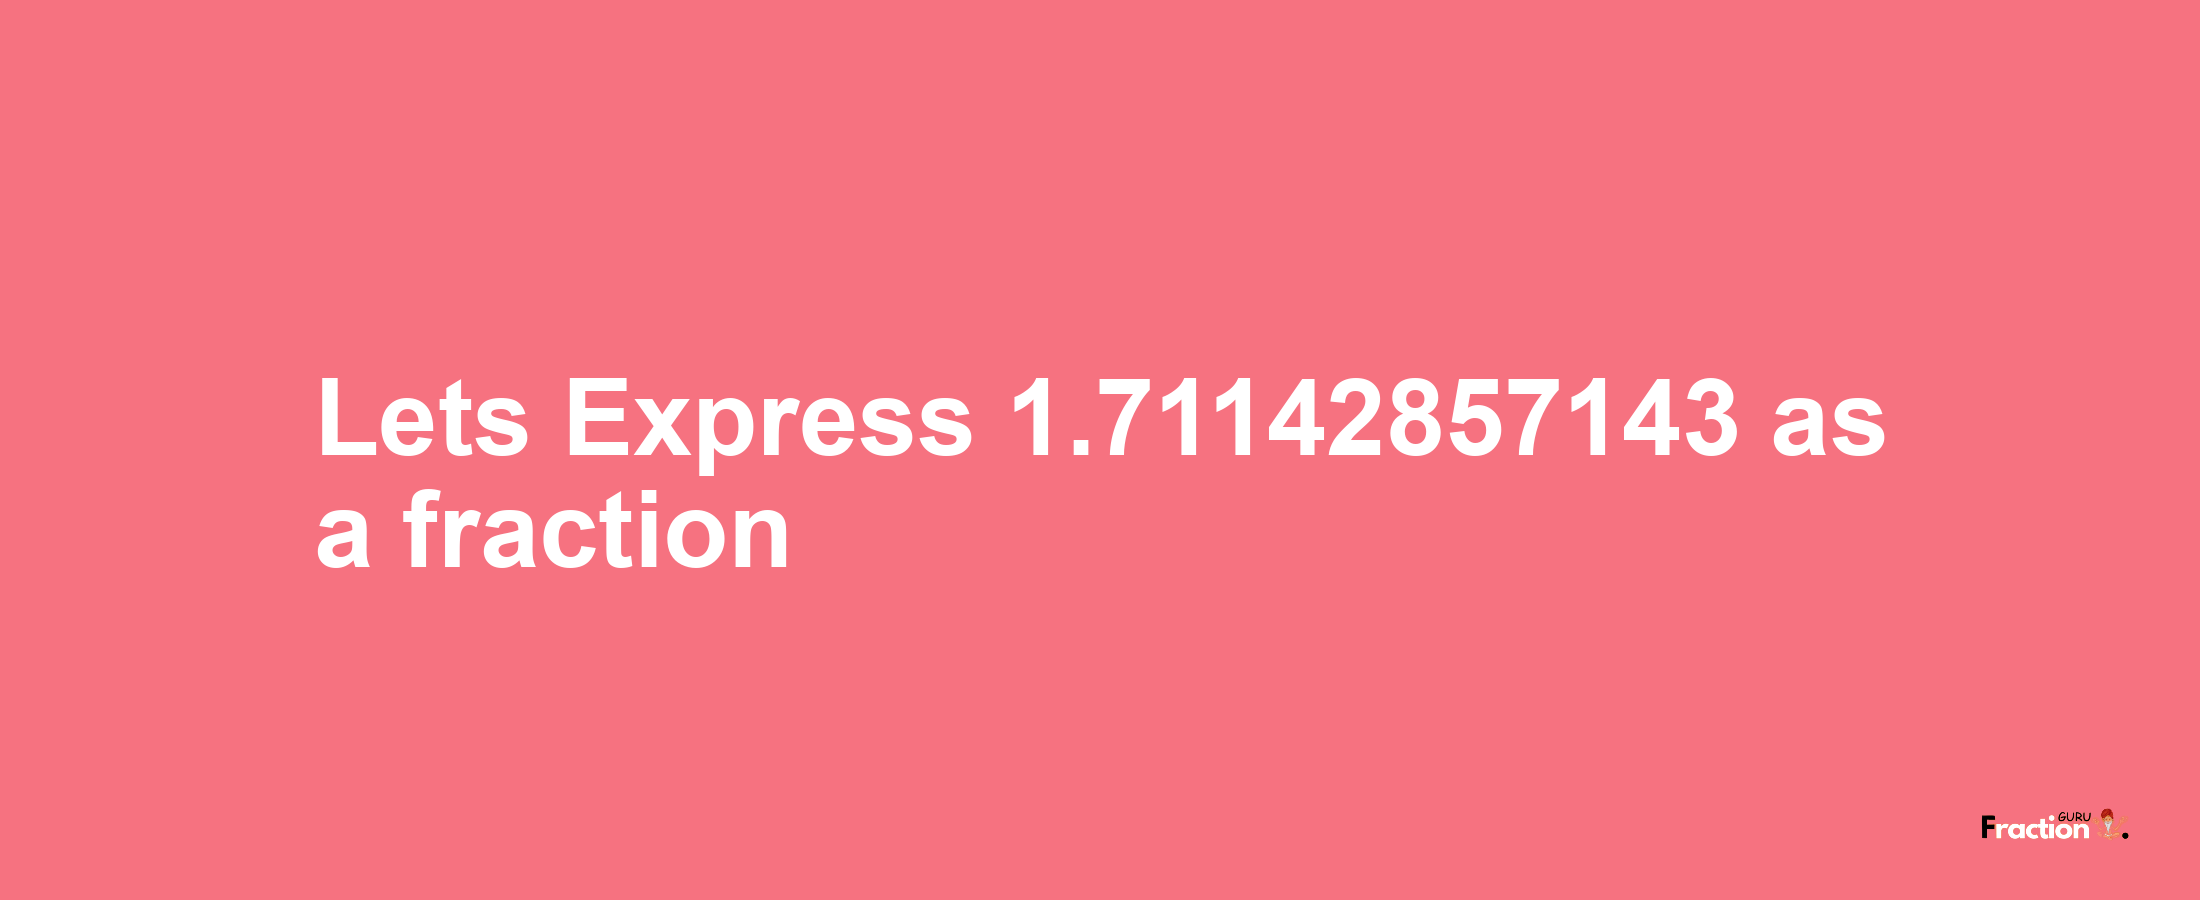 Lets Express 1.71142857143 as afraction